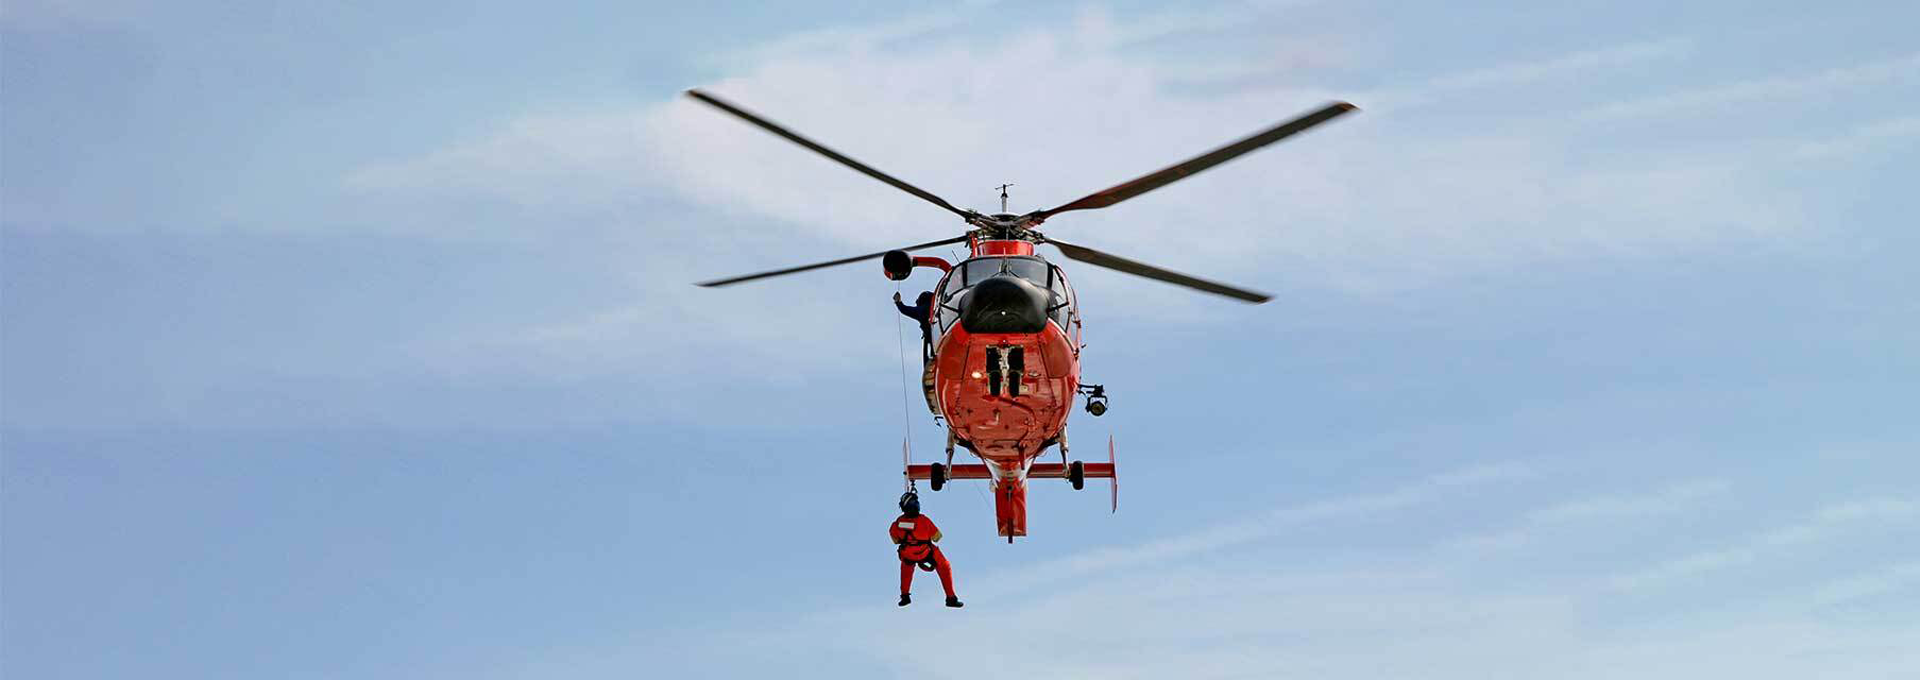 Coast Guard helipcopter